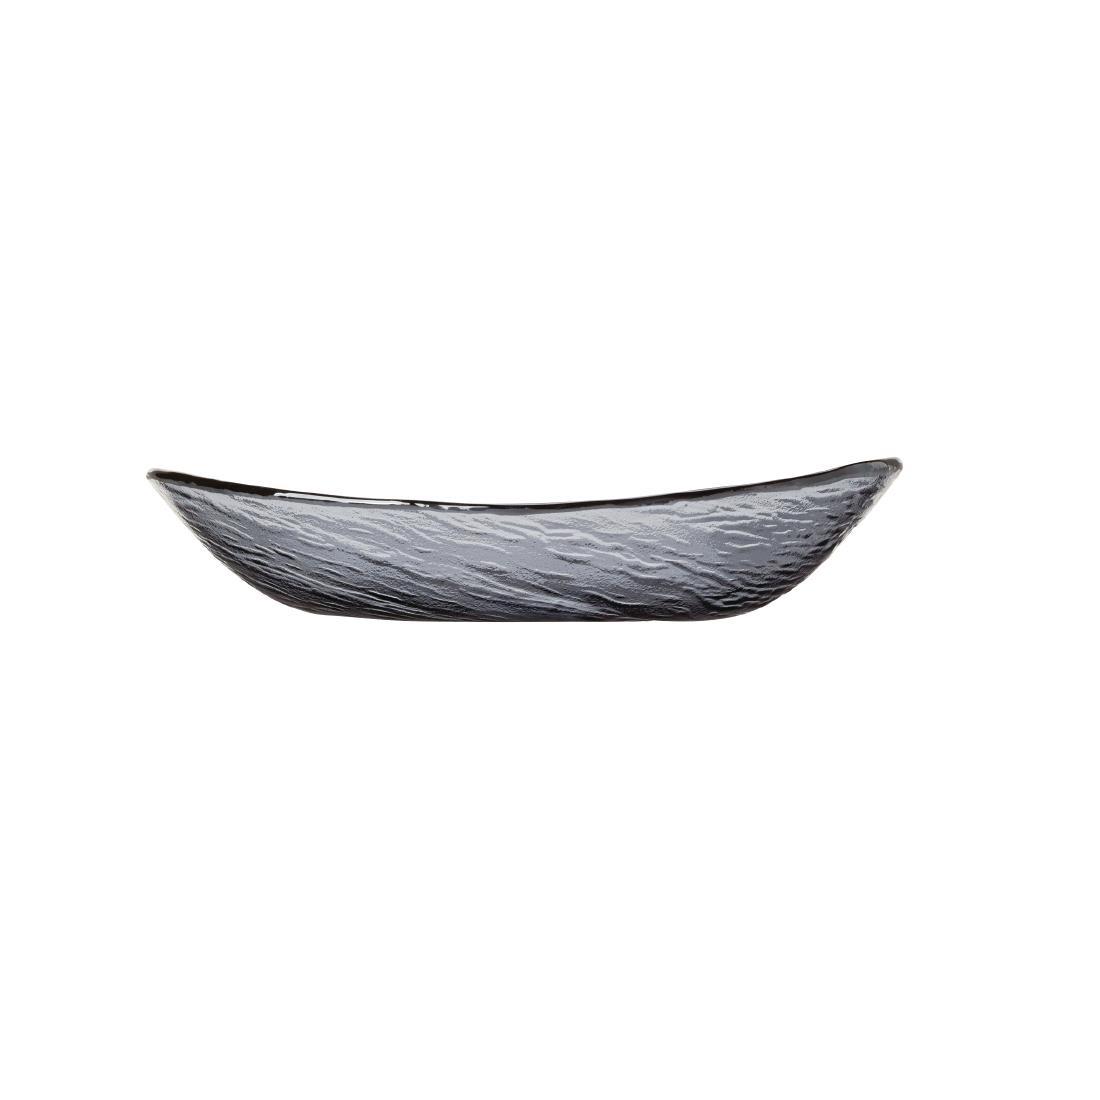 Steelite Scape Glass Smoked Oval Bowls 300mm (Pack of 6) - VV718  - 2